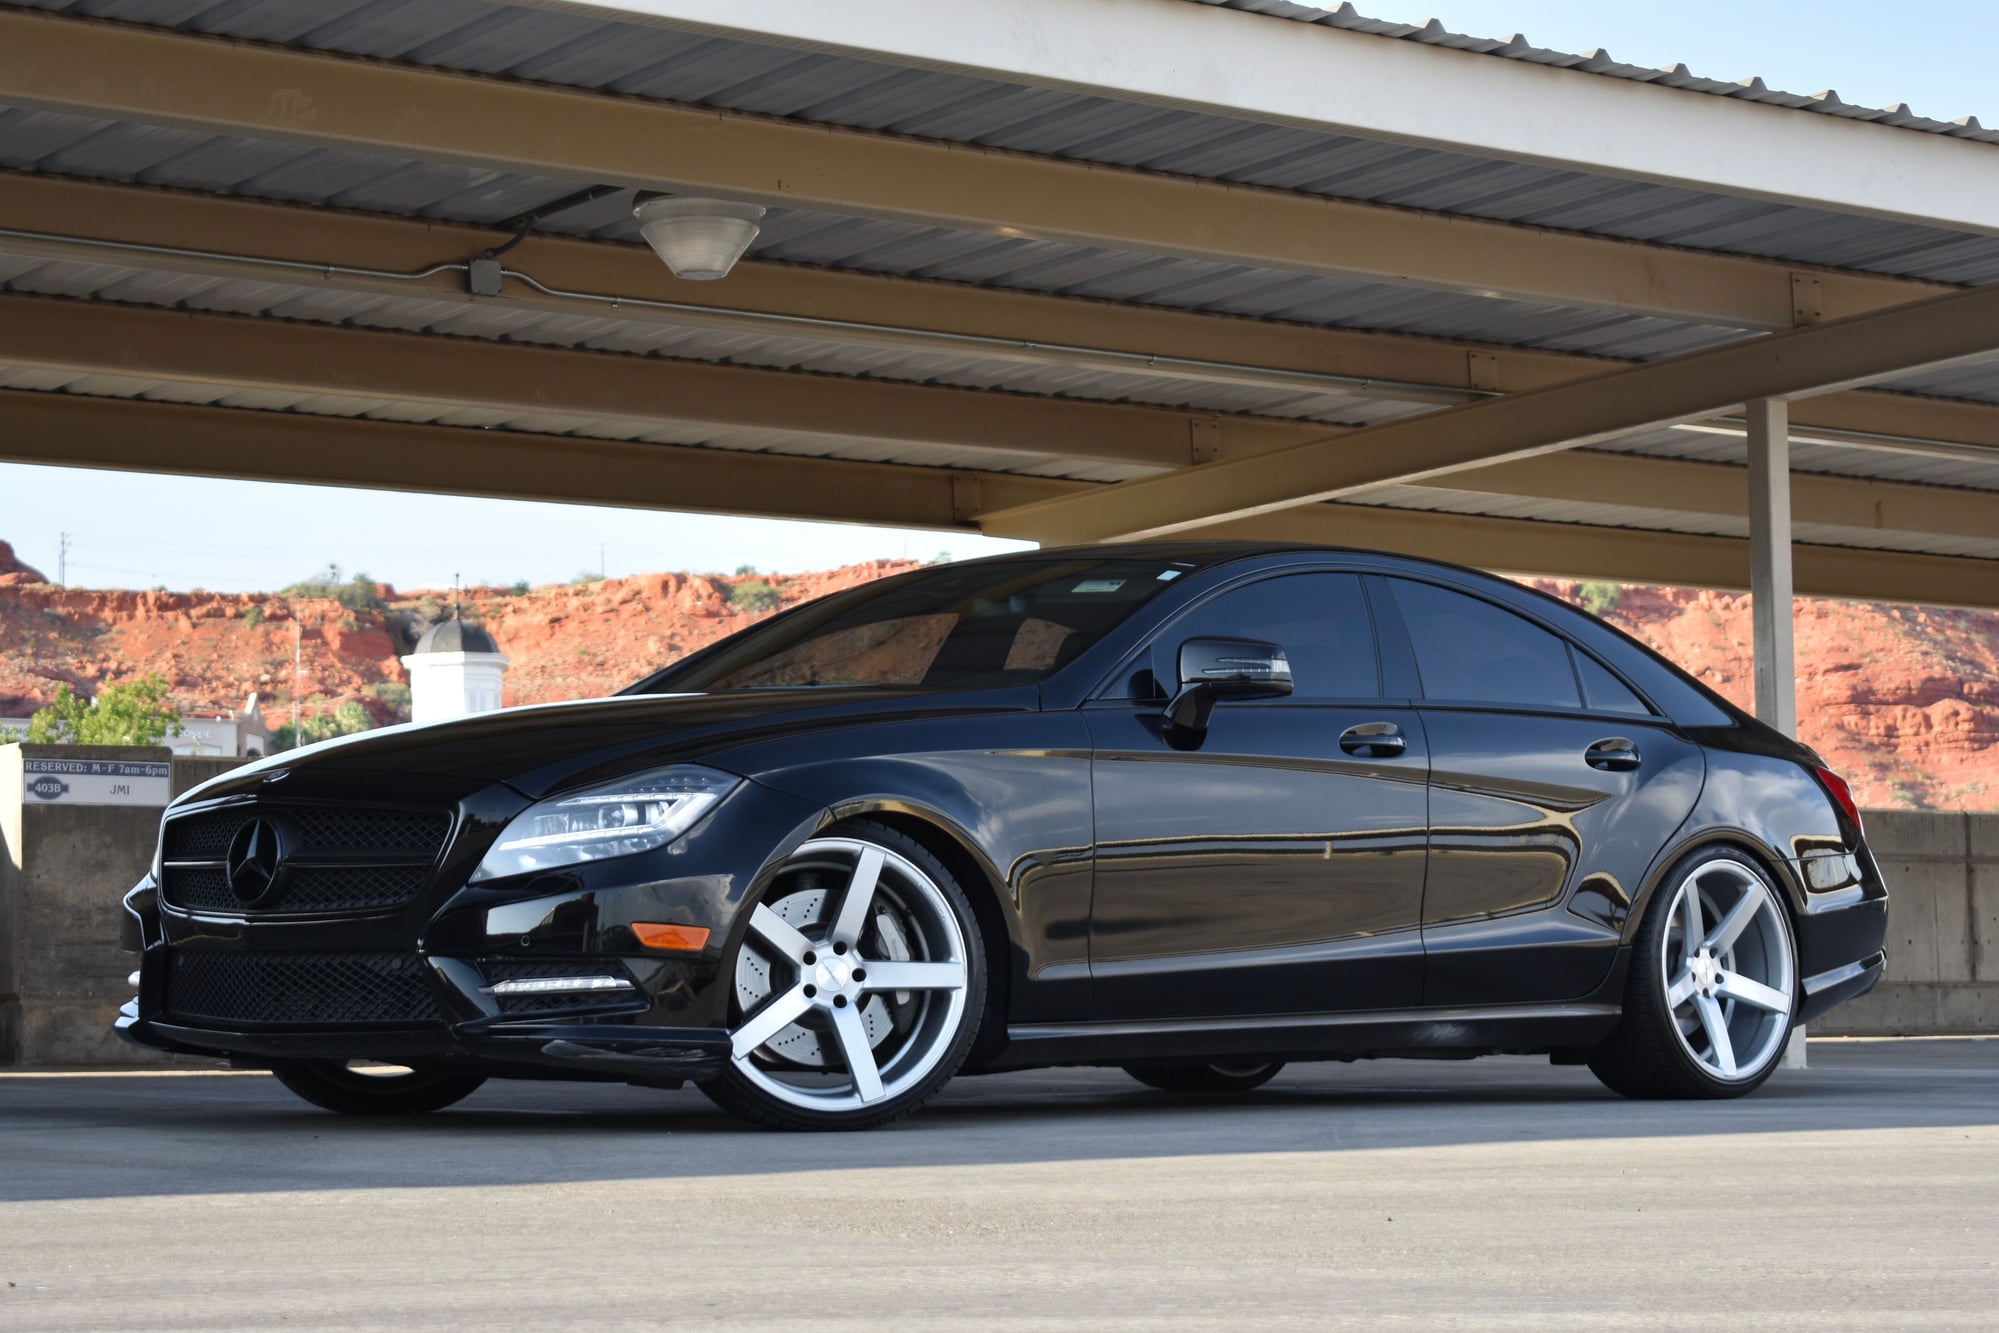 2014 Mercedes-Benz CLS550 - 2014 Mercedes CLS550 - Vossen Wheels - Lowering module - Used - VIN WDDLJ7DB3EA120235 - 79,934 Miles - 8 cyl - 2WD - Automatic - Sedan - Silver - St. George, UT 84790, United States